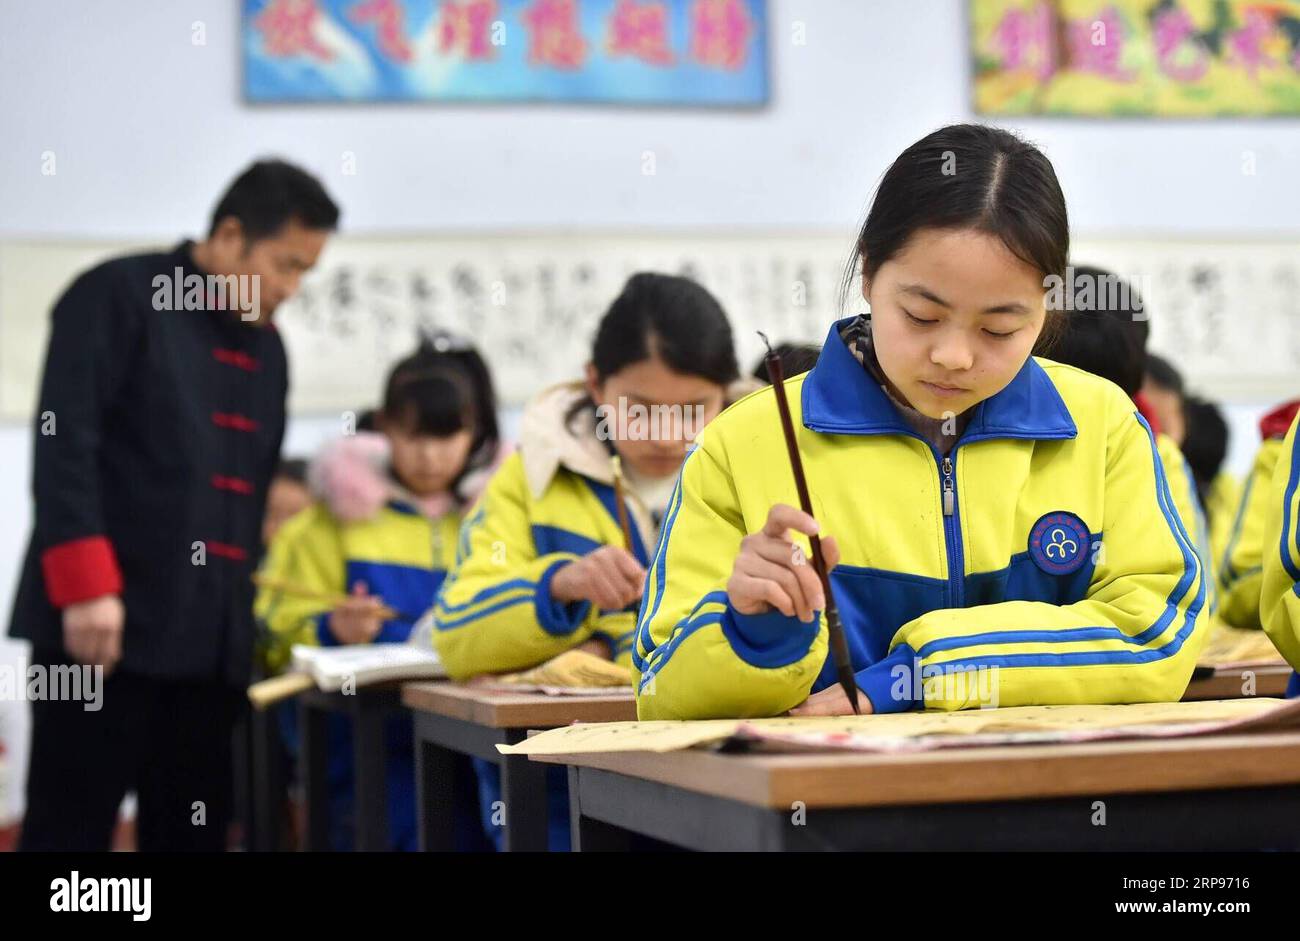 (190327) -- BEIJING, March 27, 2019 -- Students practice writing calligraphy at Hanjiawa Middle School in Shijiazhuang, north China s Hebei Province, Feb. 28, 2019. China s efforts to promote the balanced development of compulsory education, which usually means narrowing inter-regional, rural-urban or inter-school gaps in terms of education conditions and quality, has borne fruit, the Ministry of Education said Tuesday. According to the ministry, the balanced development of compulsory education has been achieved in 2,717 counties, representing 92.7 percent of counties across the country. ) CHI Stock Photo